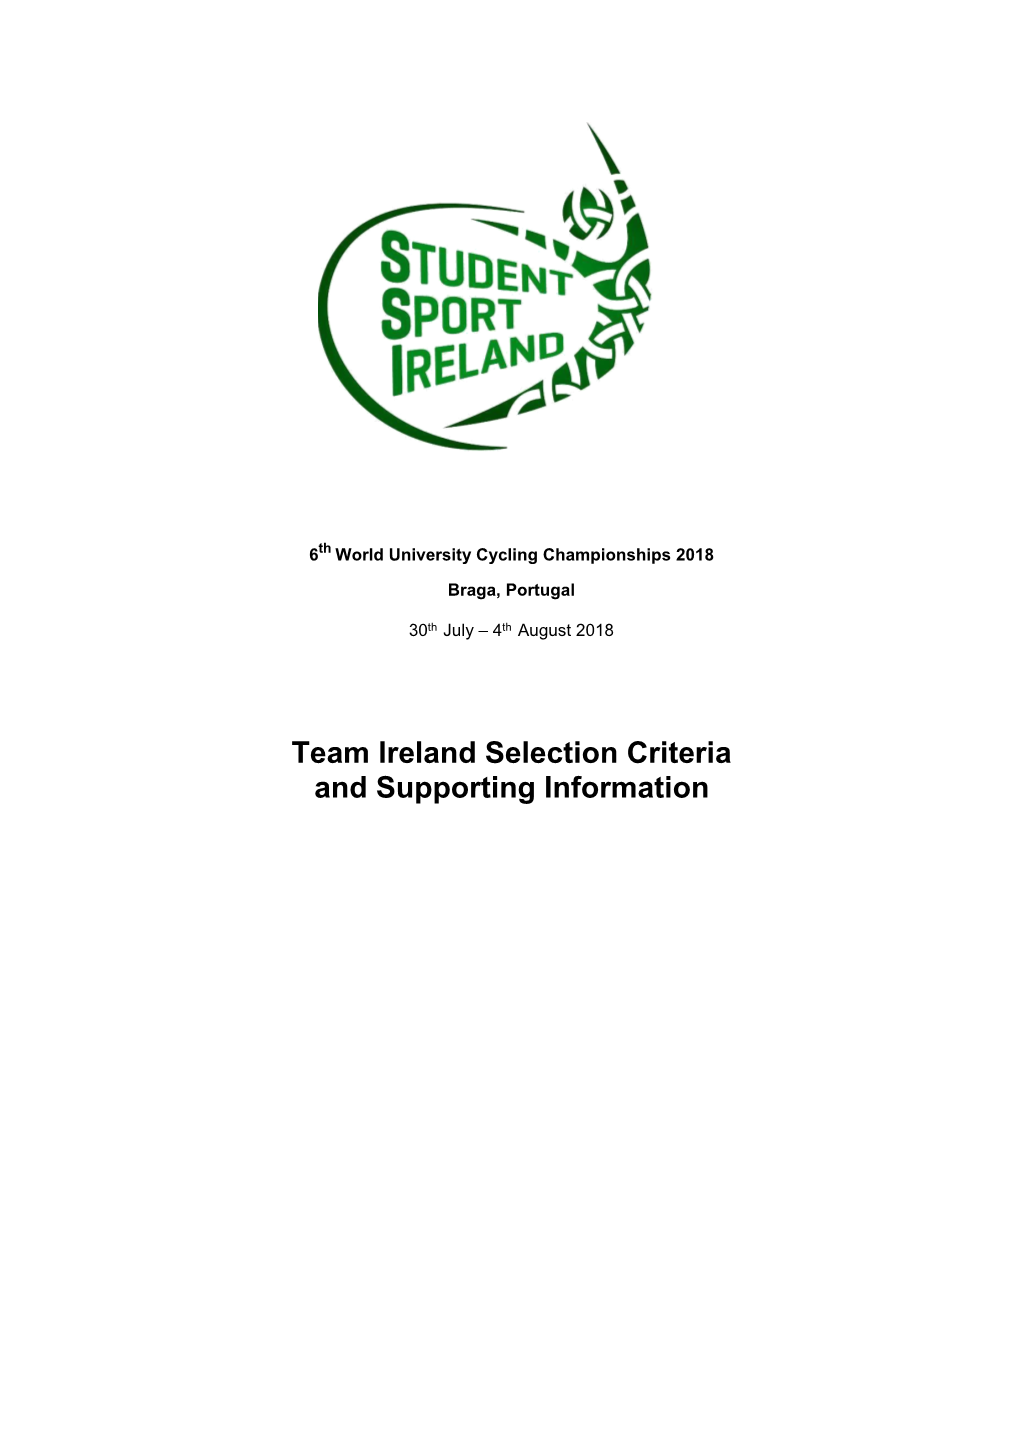 Team Ireland Selection Criteria and Supporting Information